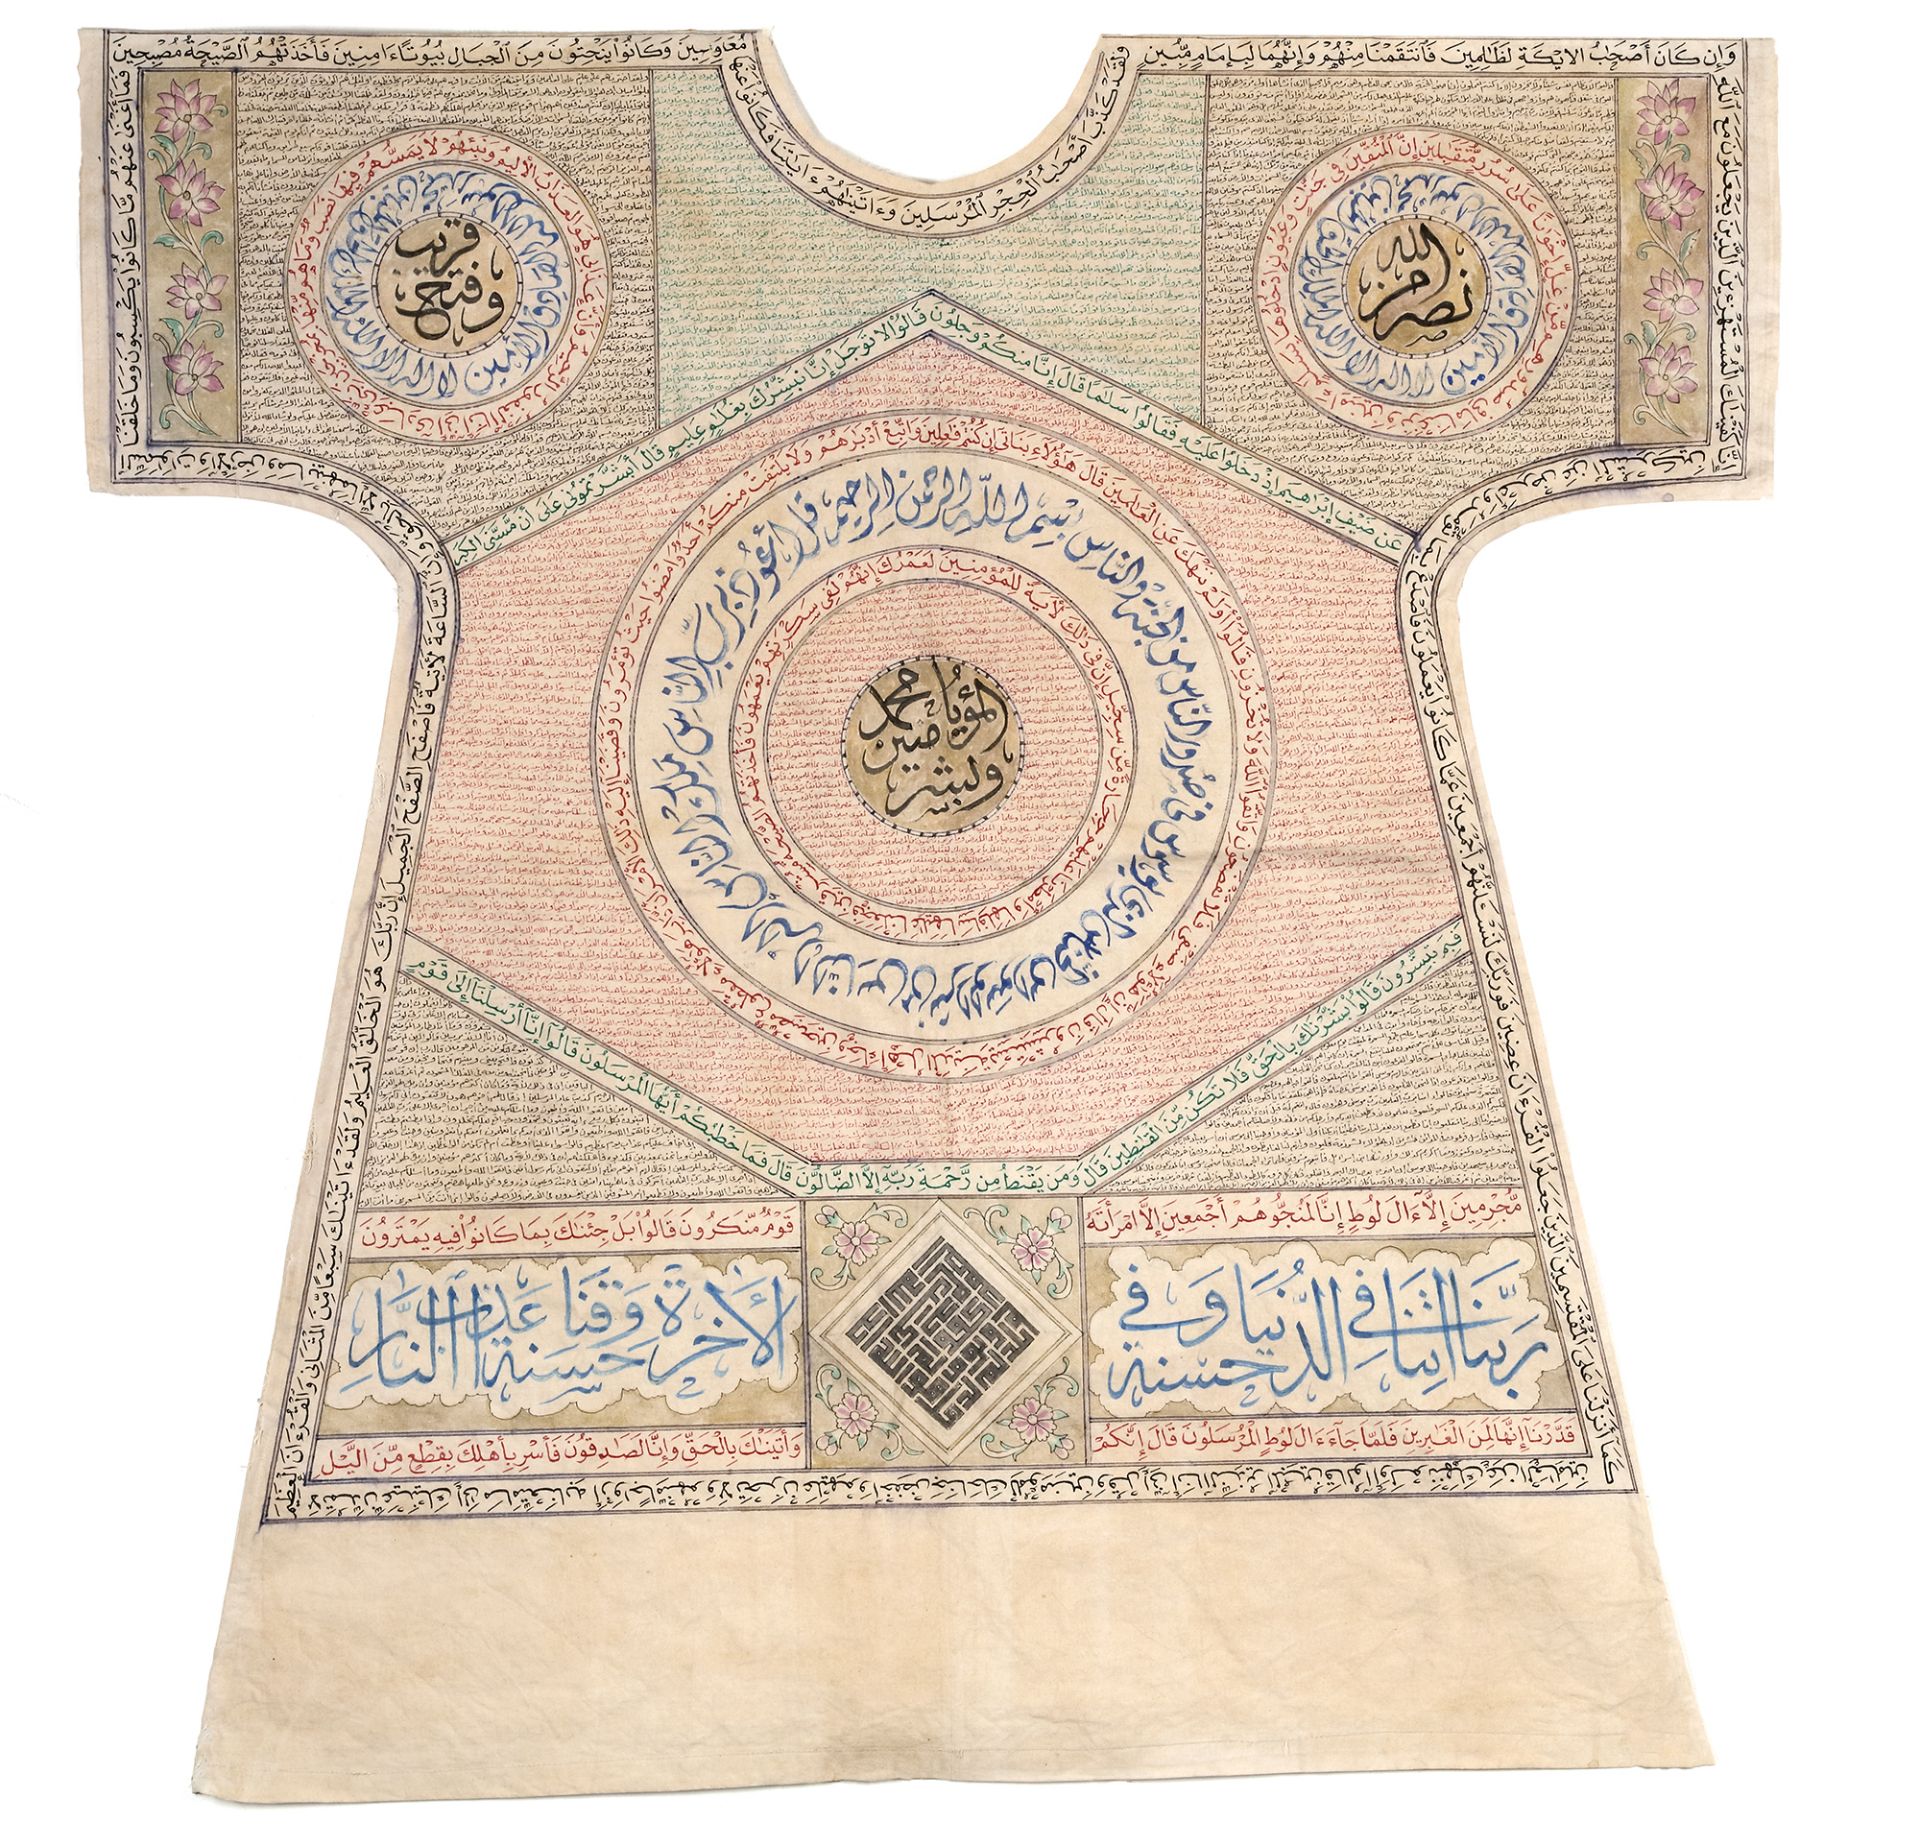 A LARGE OTTOMAN TALISMANIC SHIRT (JAMA) WITH EXTRACTS FROM THE QURAN AND PRAYERS, EARLY 20TH CENTUR - Image 2 of 2